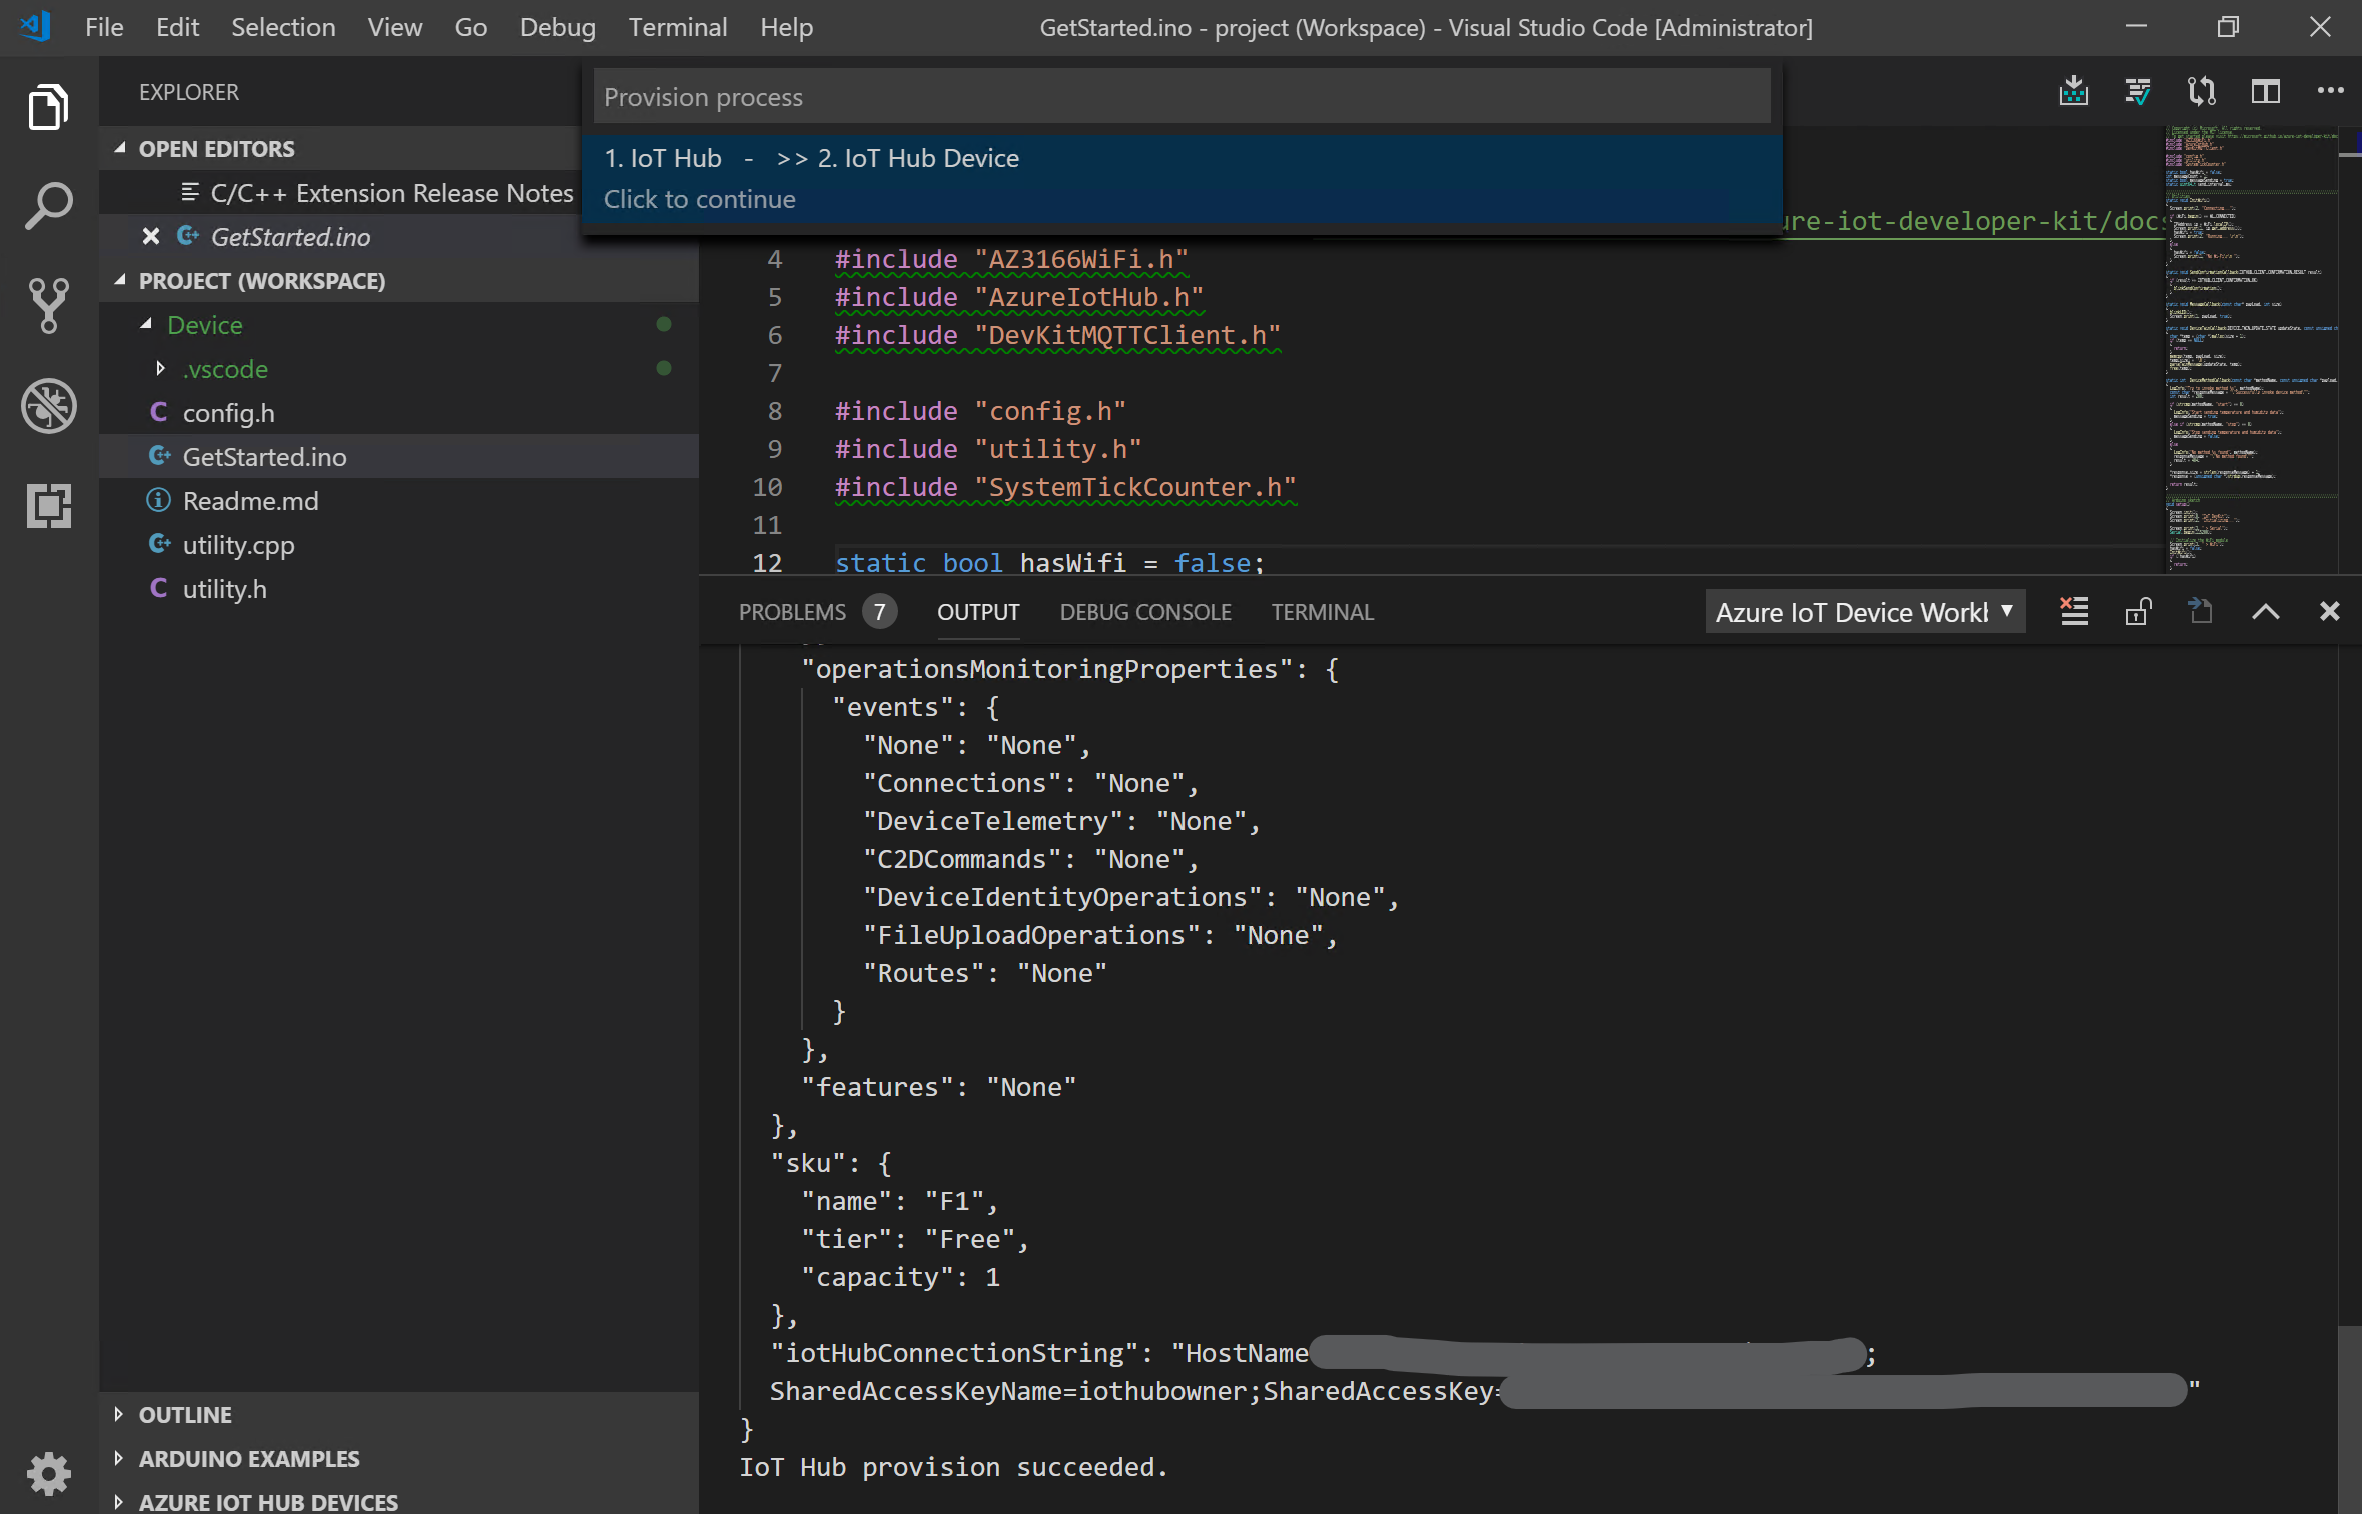 A screenshot that shows the output window in VS Code.